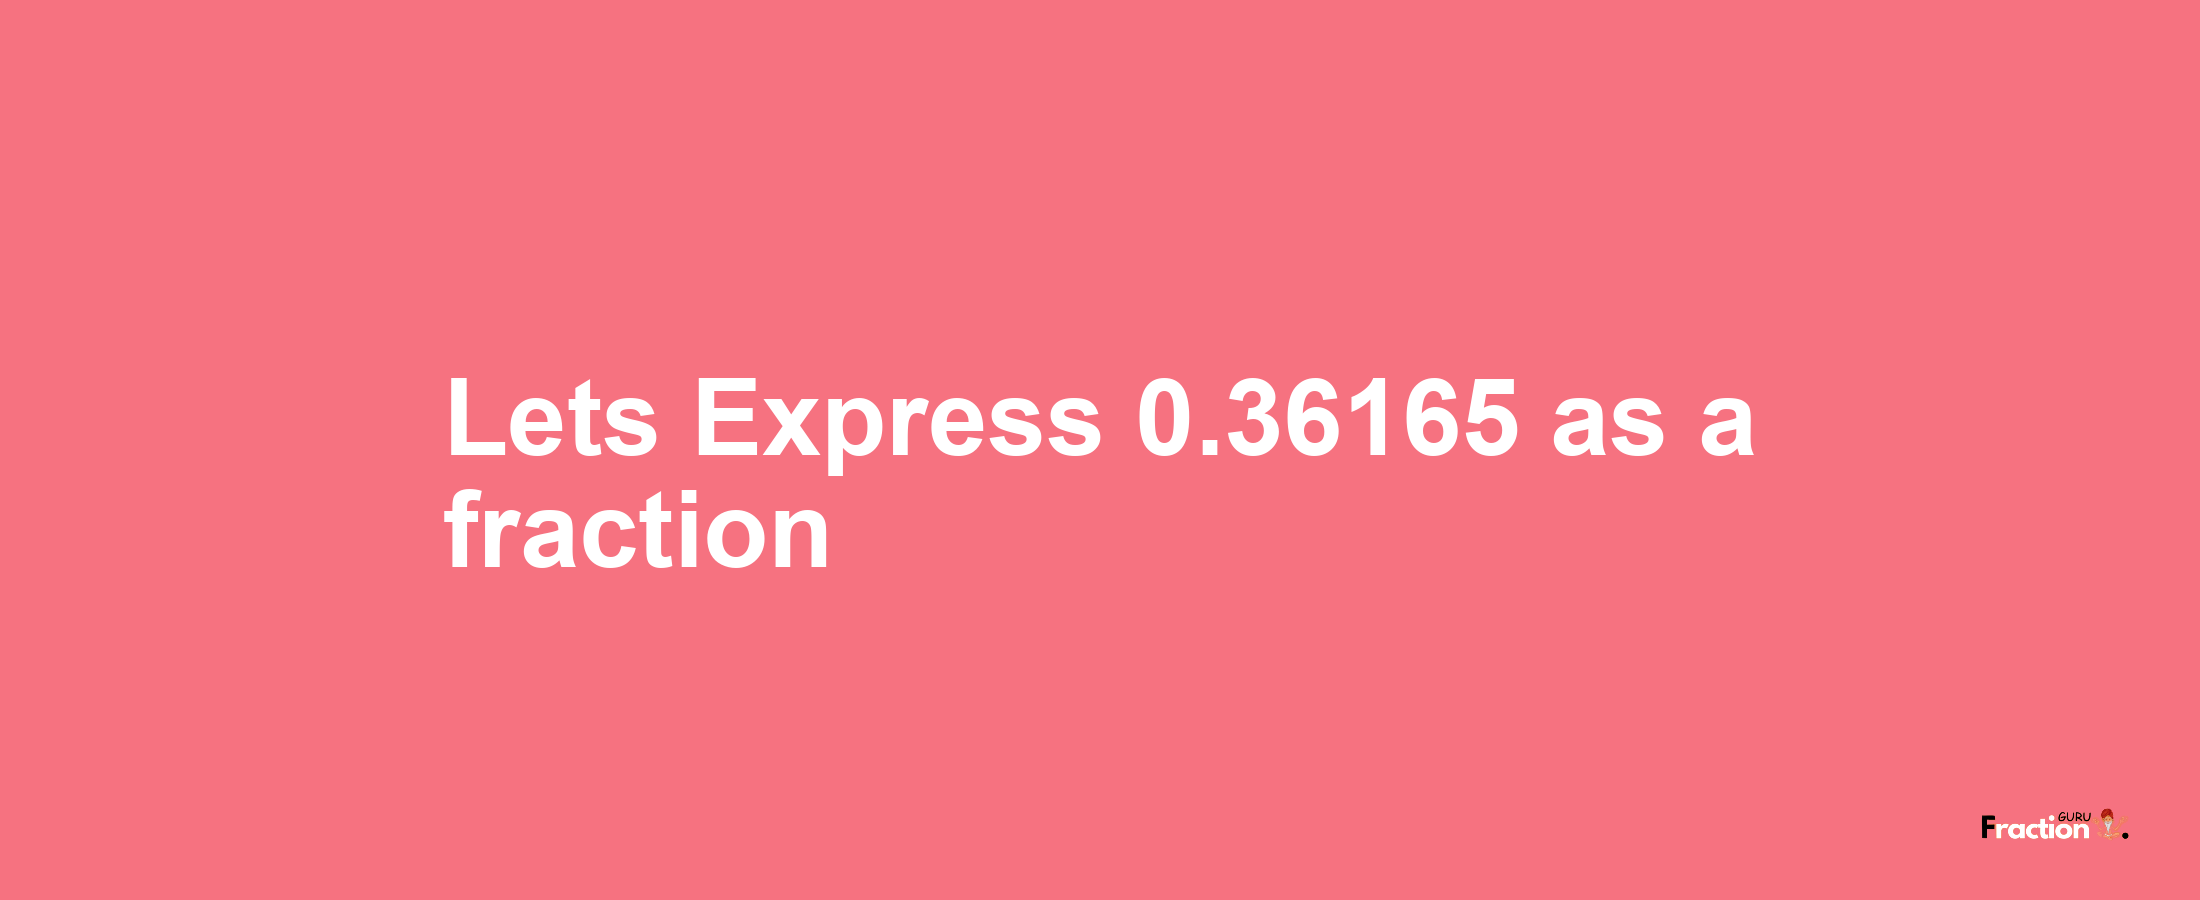 Lets Express 0.36165 as afraction